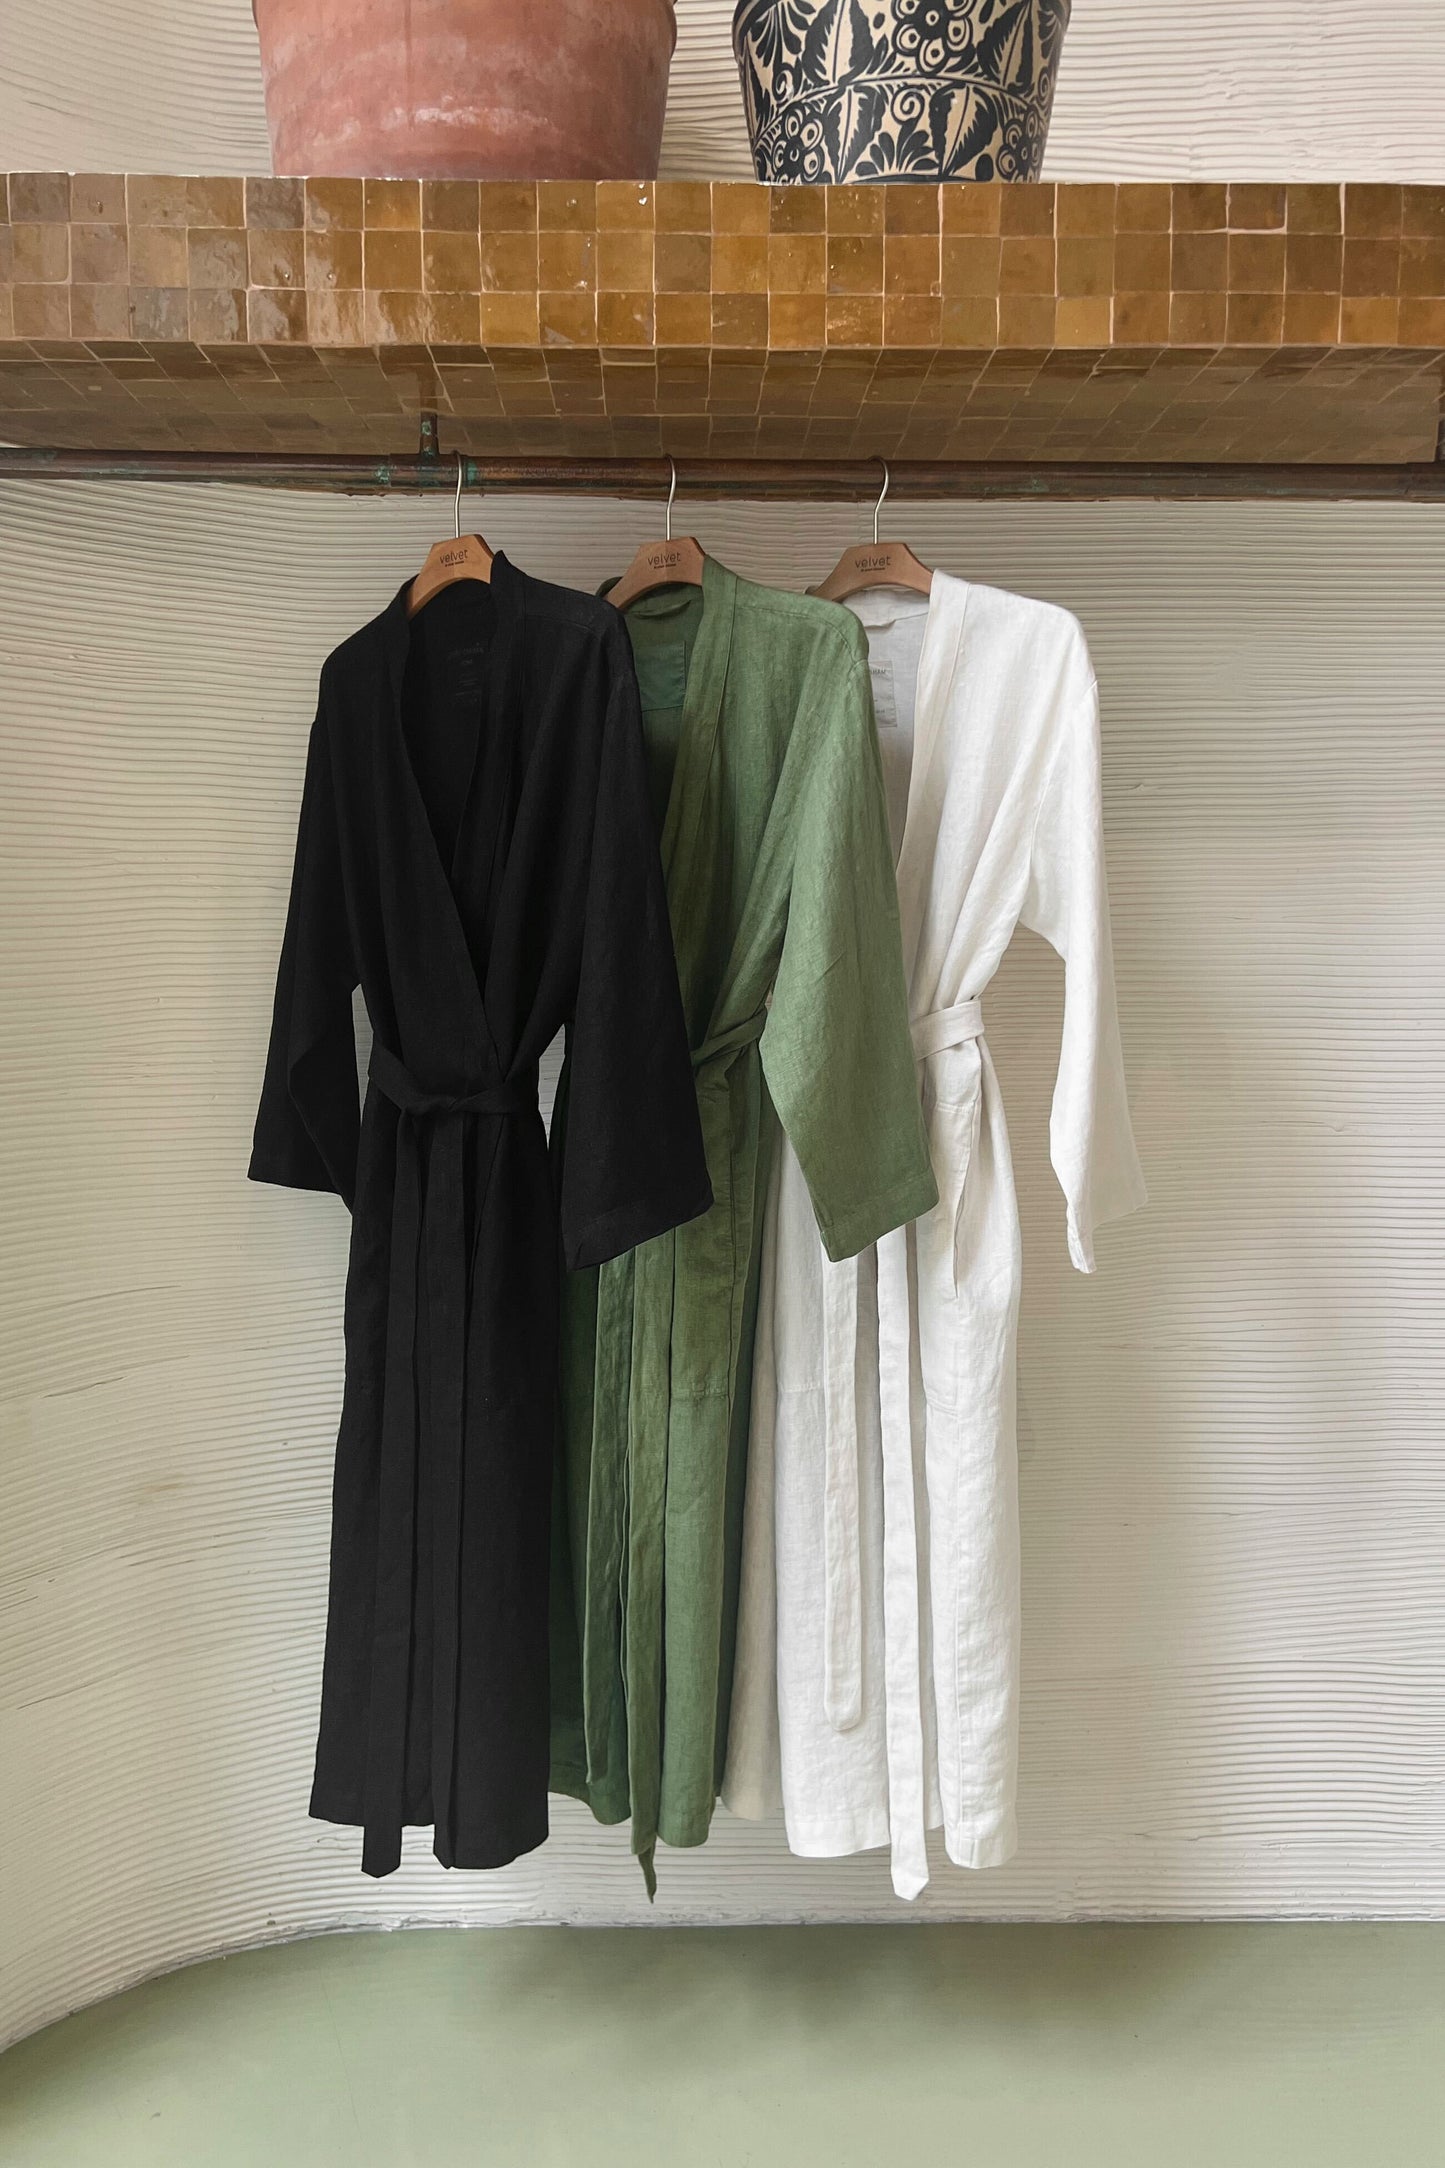 Jenny Graham Linen Robe in black on hanger near textured wall with robe in basil and beach-26312948318401